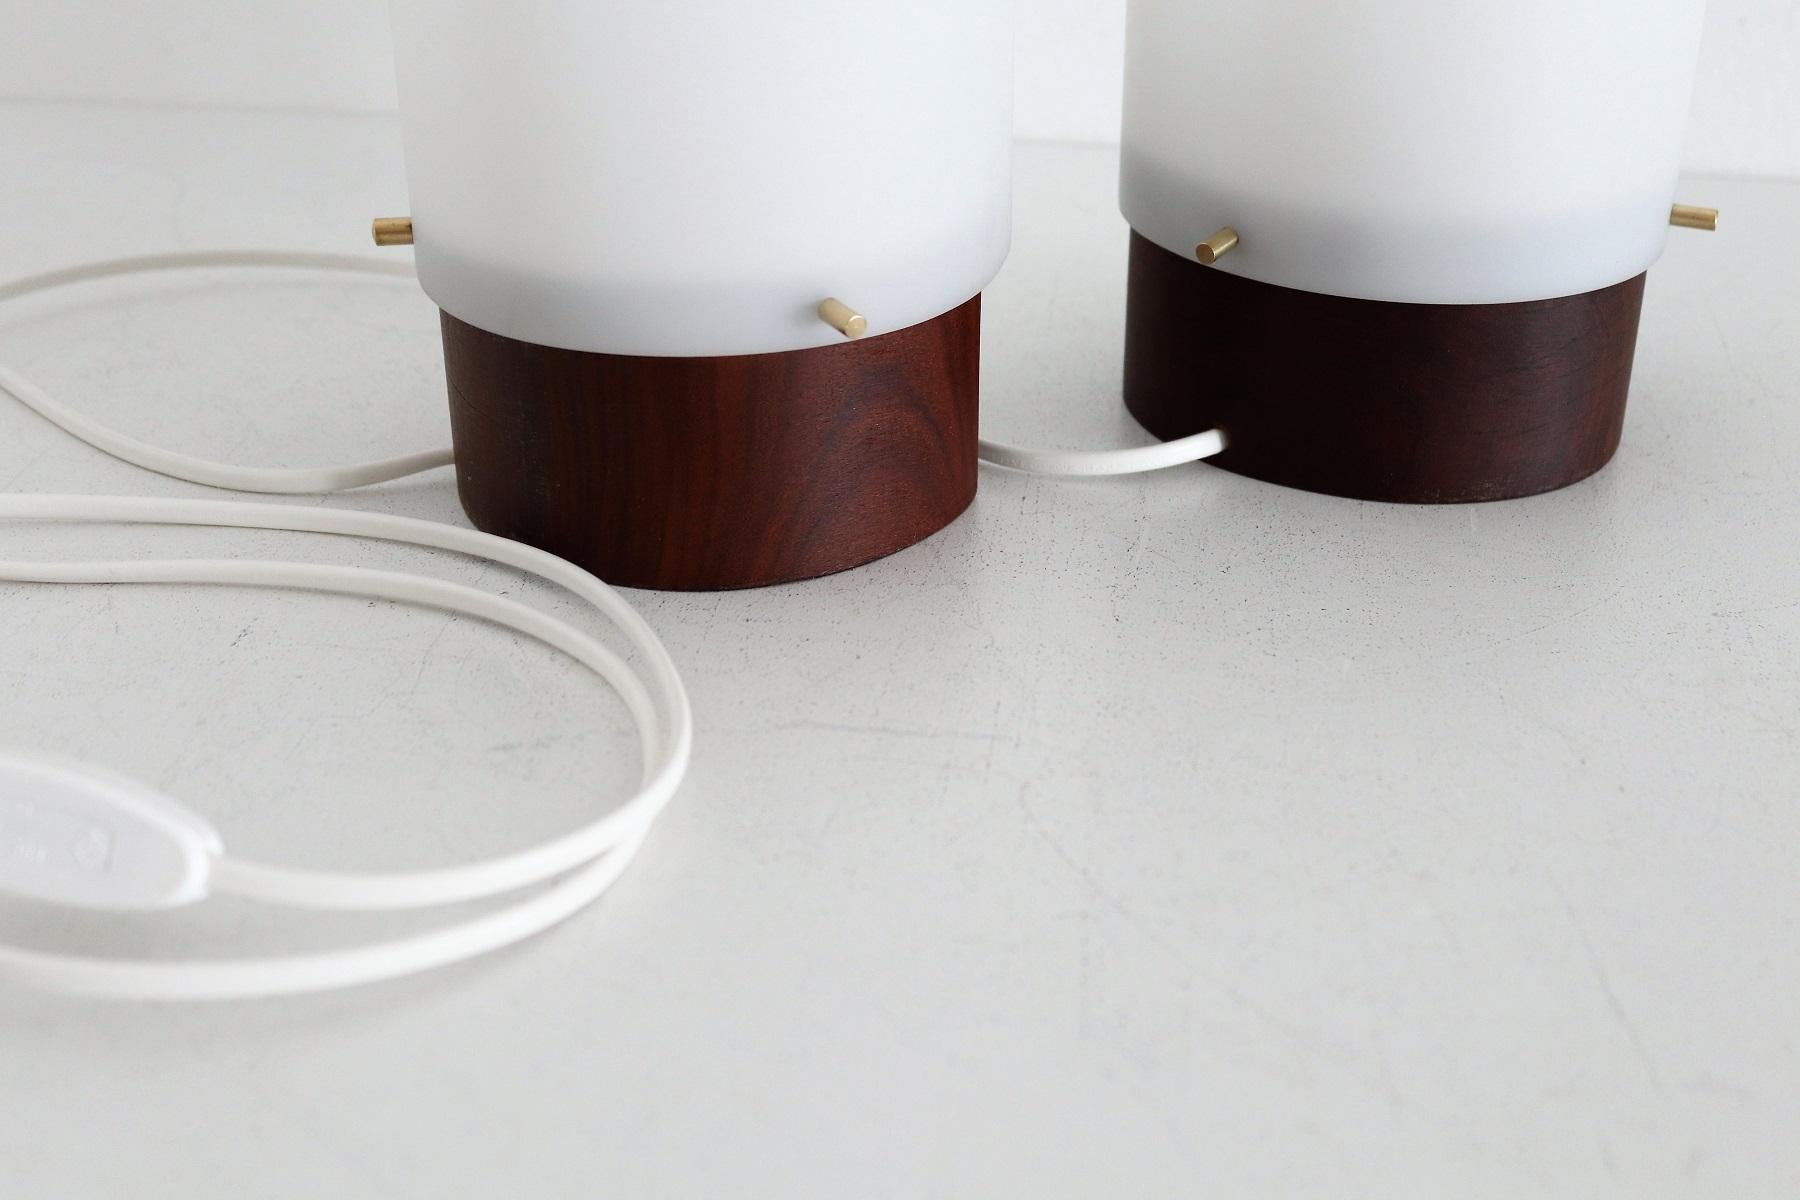 Italian Modernist Teakwood Table Lamps with Methacrylic Curved Shades, 1950s For Sale 4